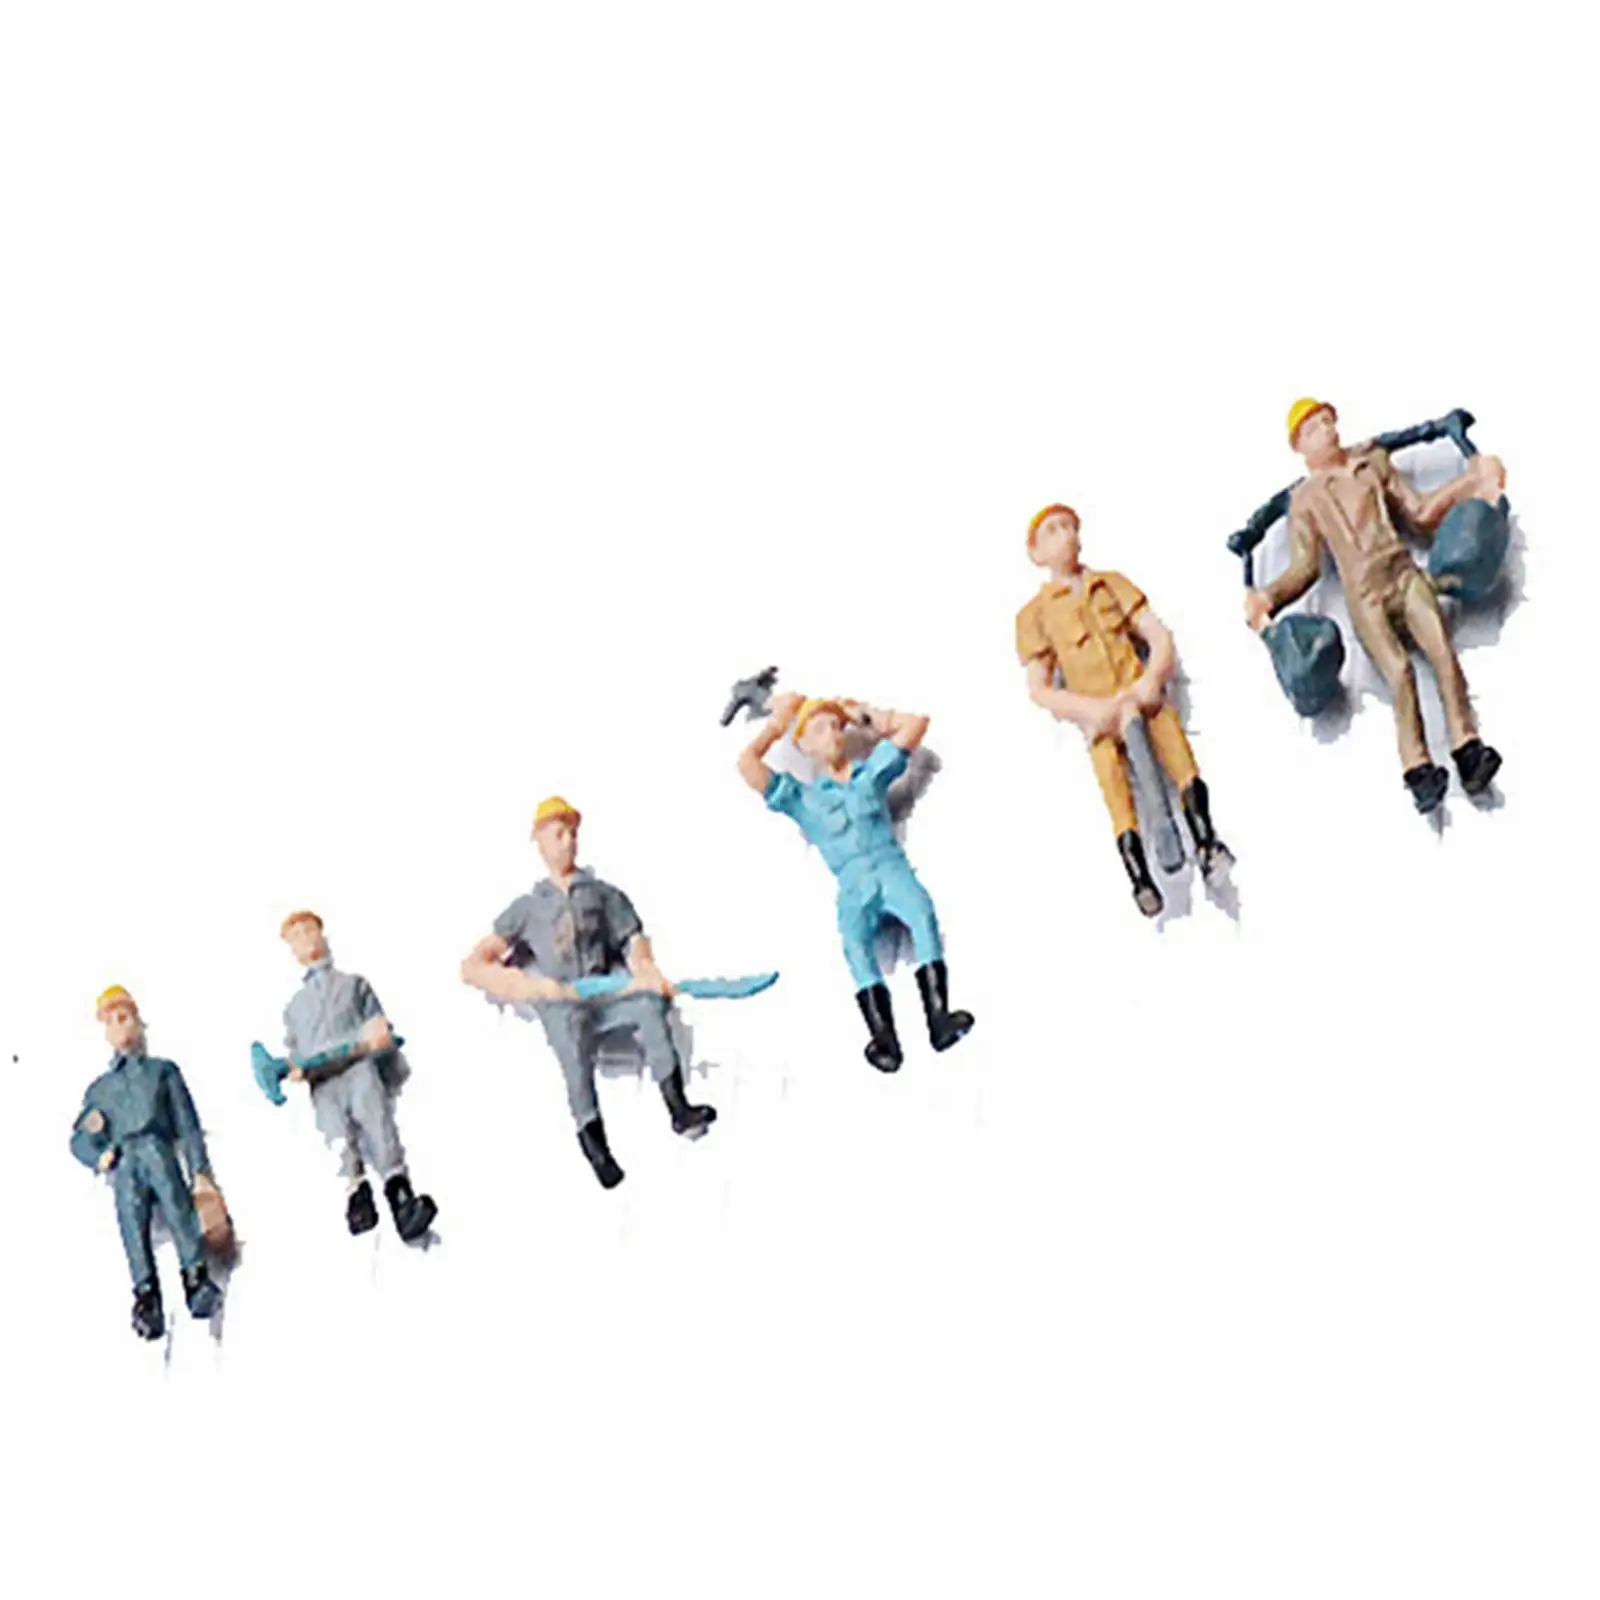 

10Pcs 1/43 Miniature Model Railroad Worker Figures O Scale Resin Figurines Tiny People Sand Table Scene DIY Projects Decoration